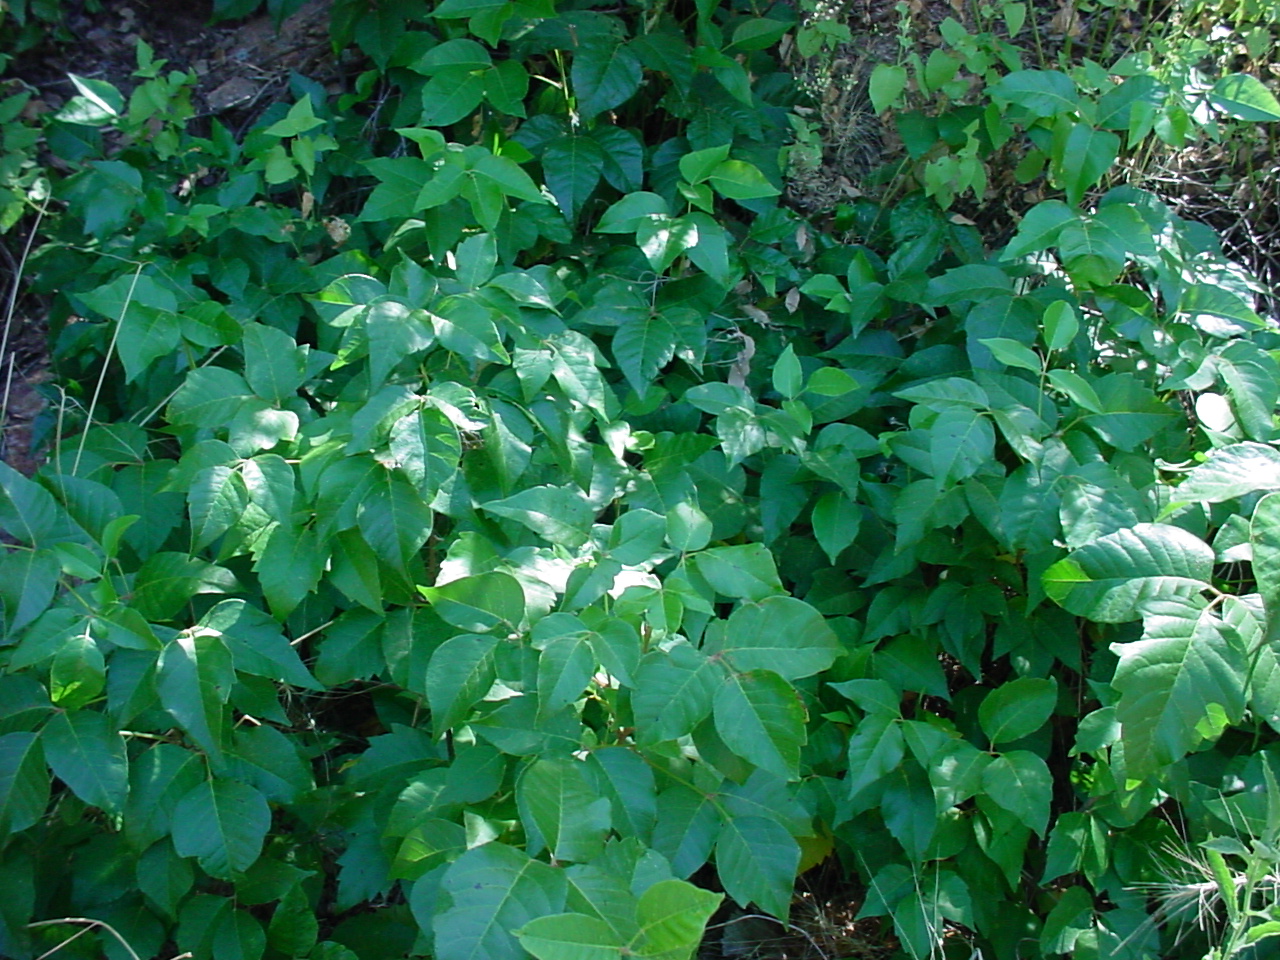 Slightly bushy growth habit, but with characteristic trifoliate leaves.